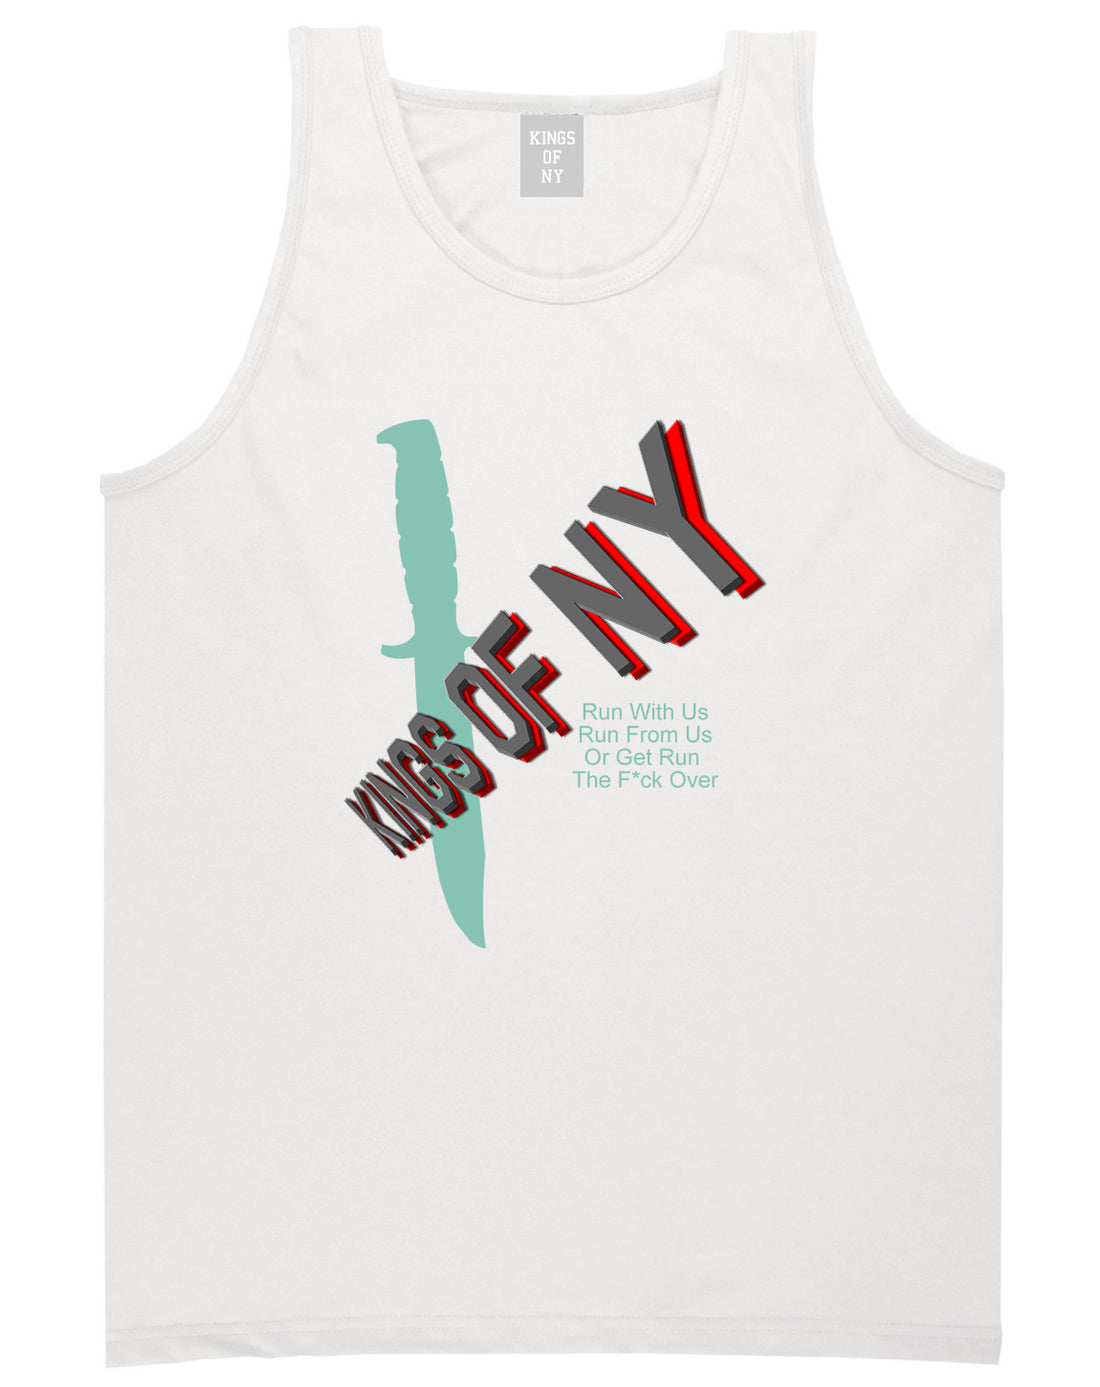 Run With Us Knife Tank Top Shirt in White